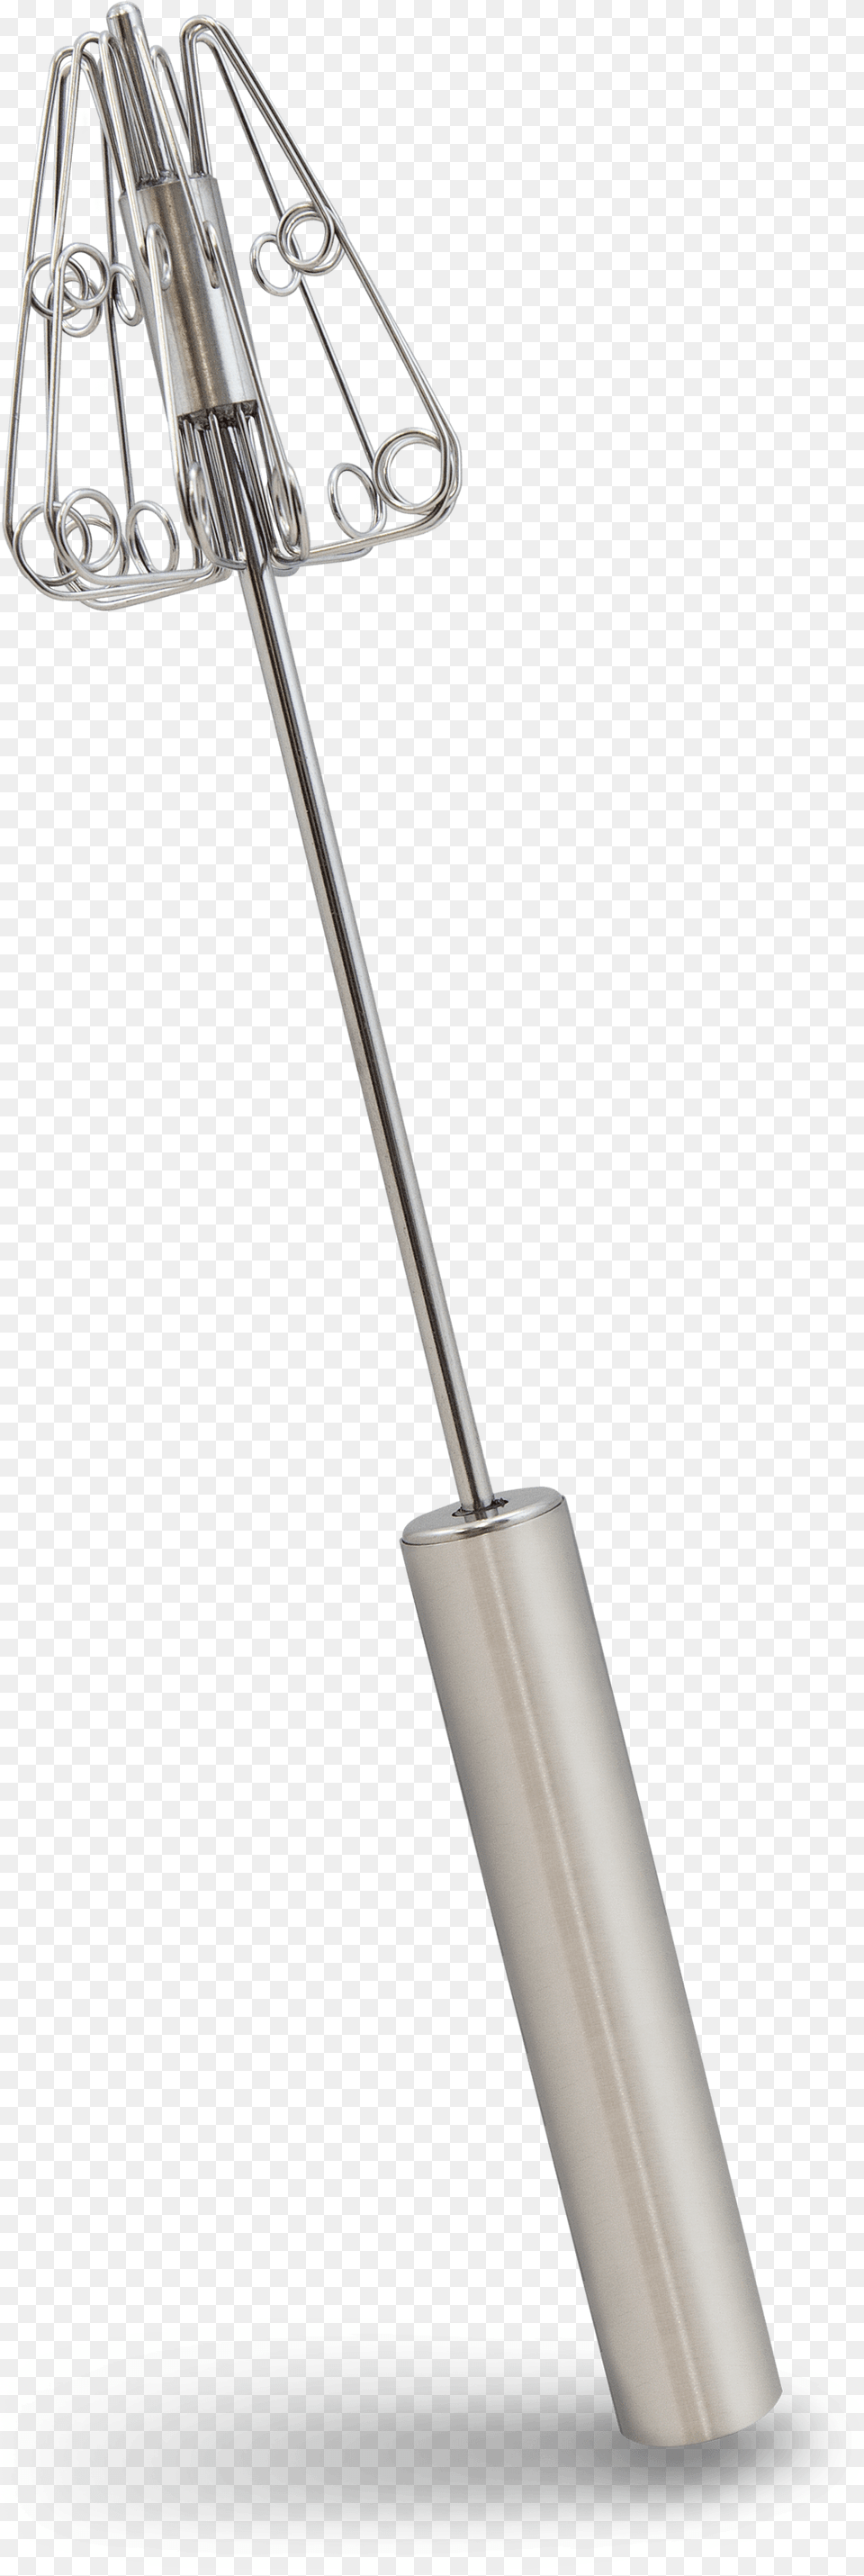 Stainless Steel Hand Blender 14quot Hand Mixer Stainless Steel, Device, Appliance, Electrical Device, Mace Club Png Image